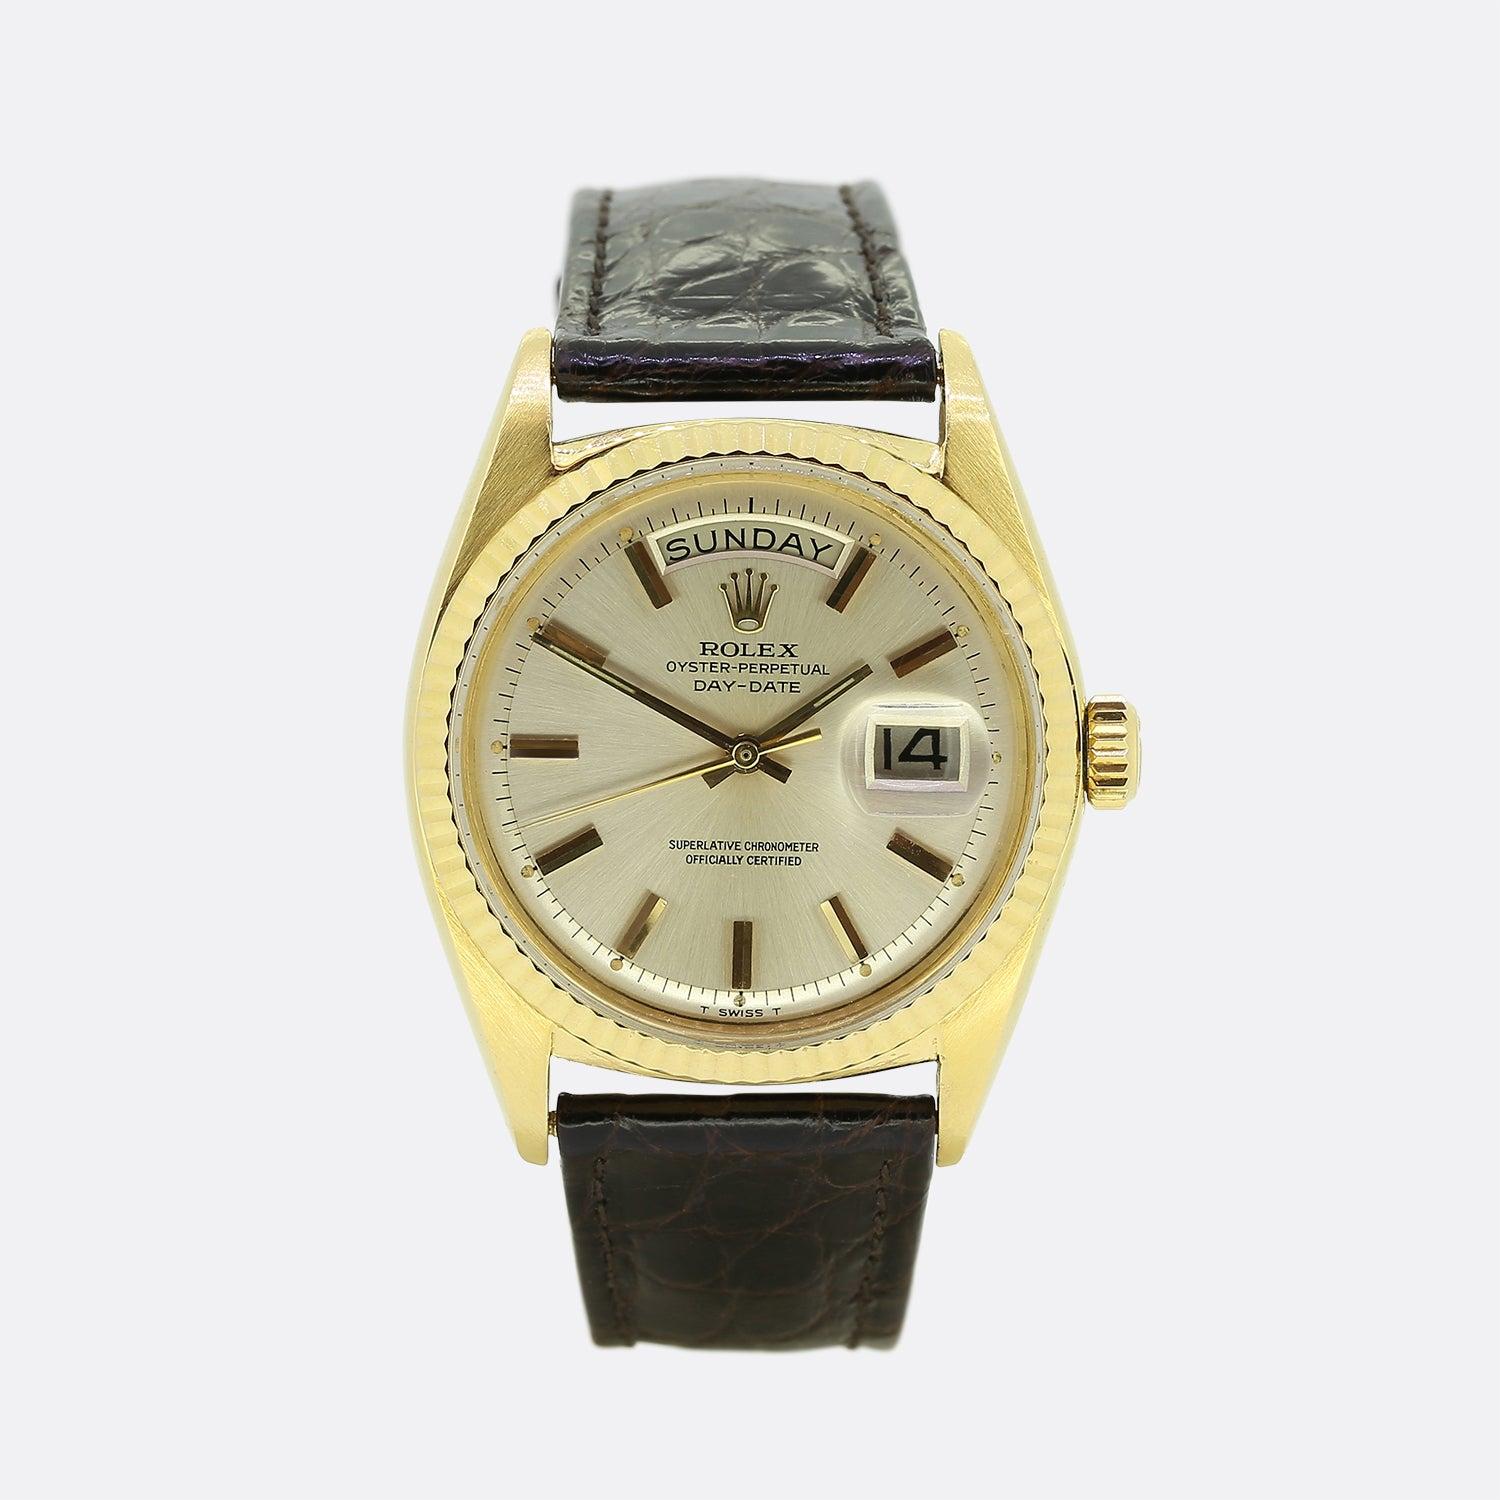 This is a vintage, 18ct yellow gold Rolex Day-Date. The watch has a silver dial, gold hour hands, 3 o'clock date aperture, and is encased in an 18ct yellow gold casing with a fluted bezel. The watch has been finished with a Rolex dark brown leather